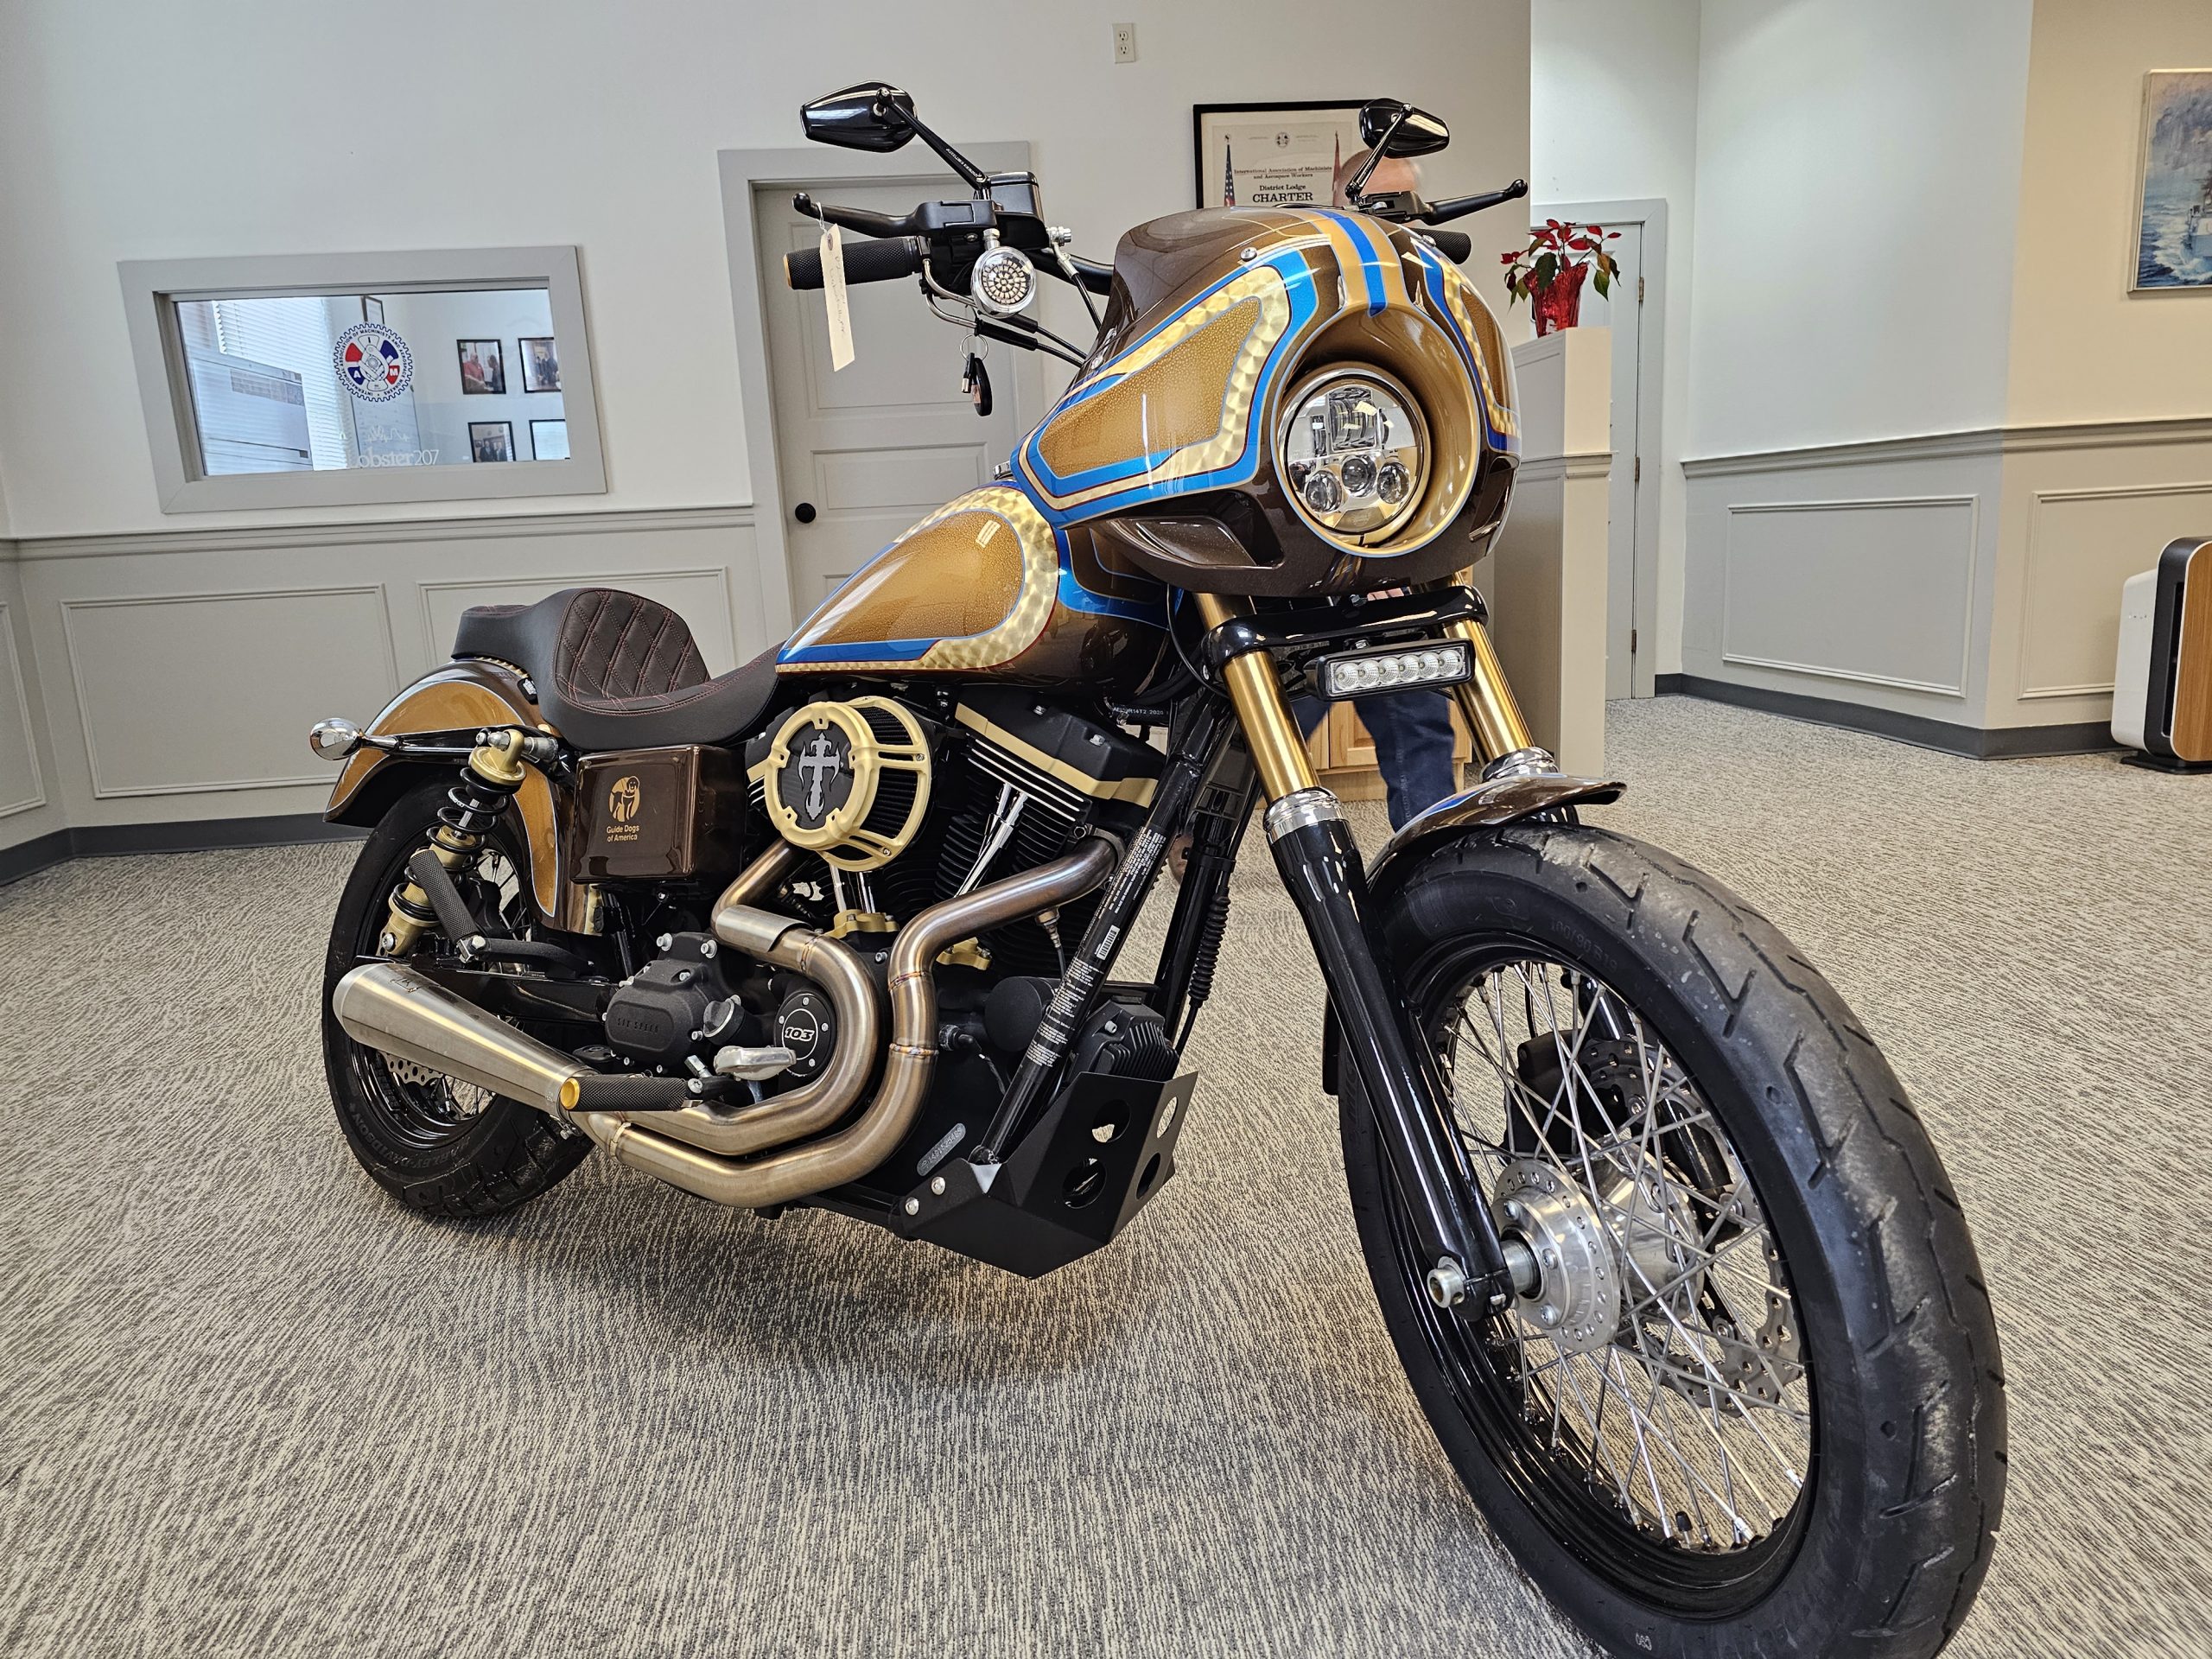 Support Guide Dogs of America and Tender Loving Canines with the IAM District Lodge 4 Motorcycle Raffle